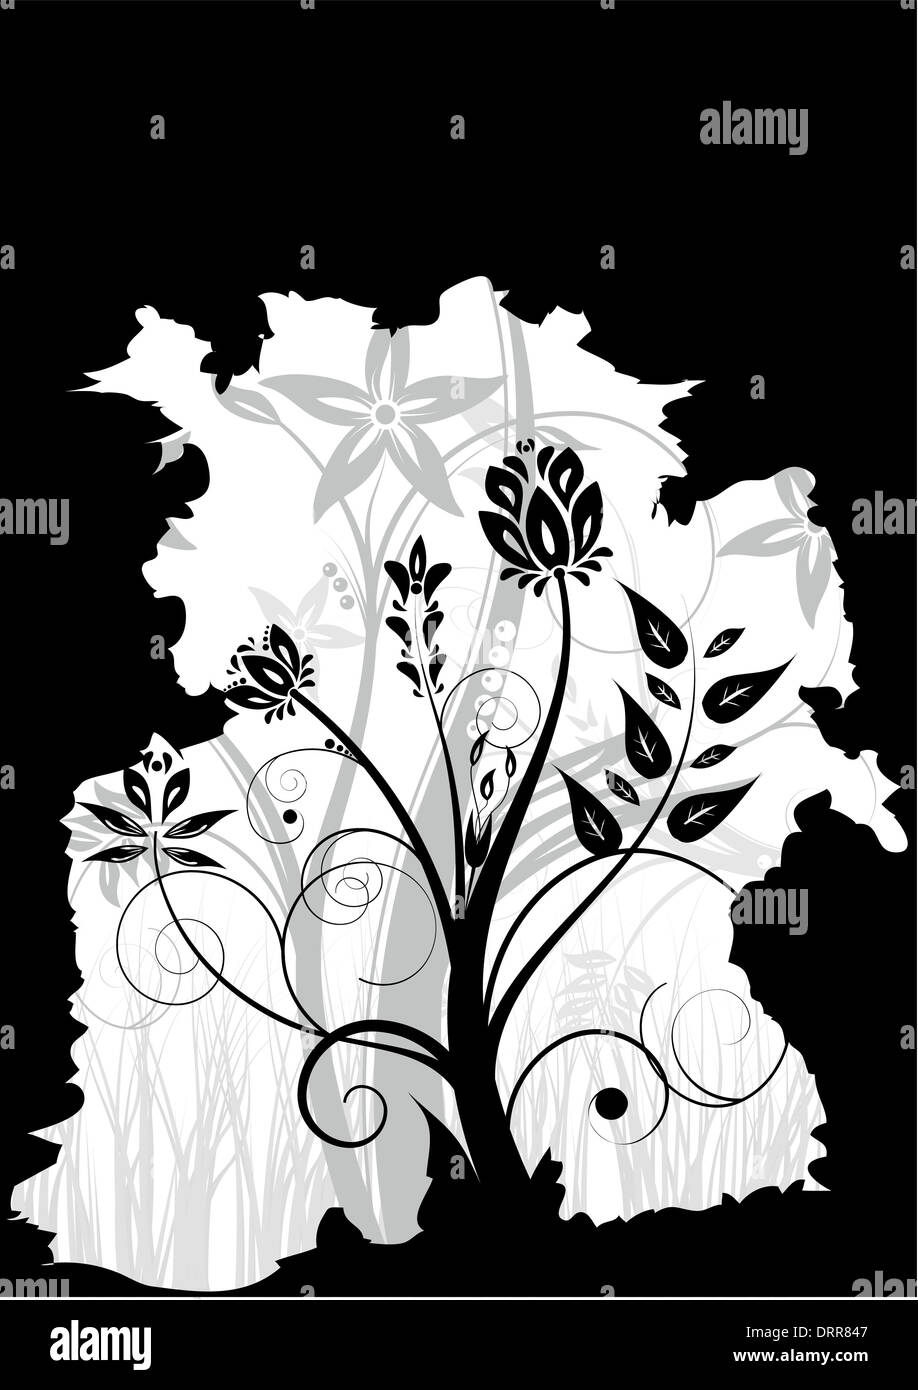 Black and white floral background Stock Photo